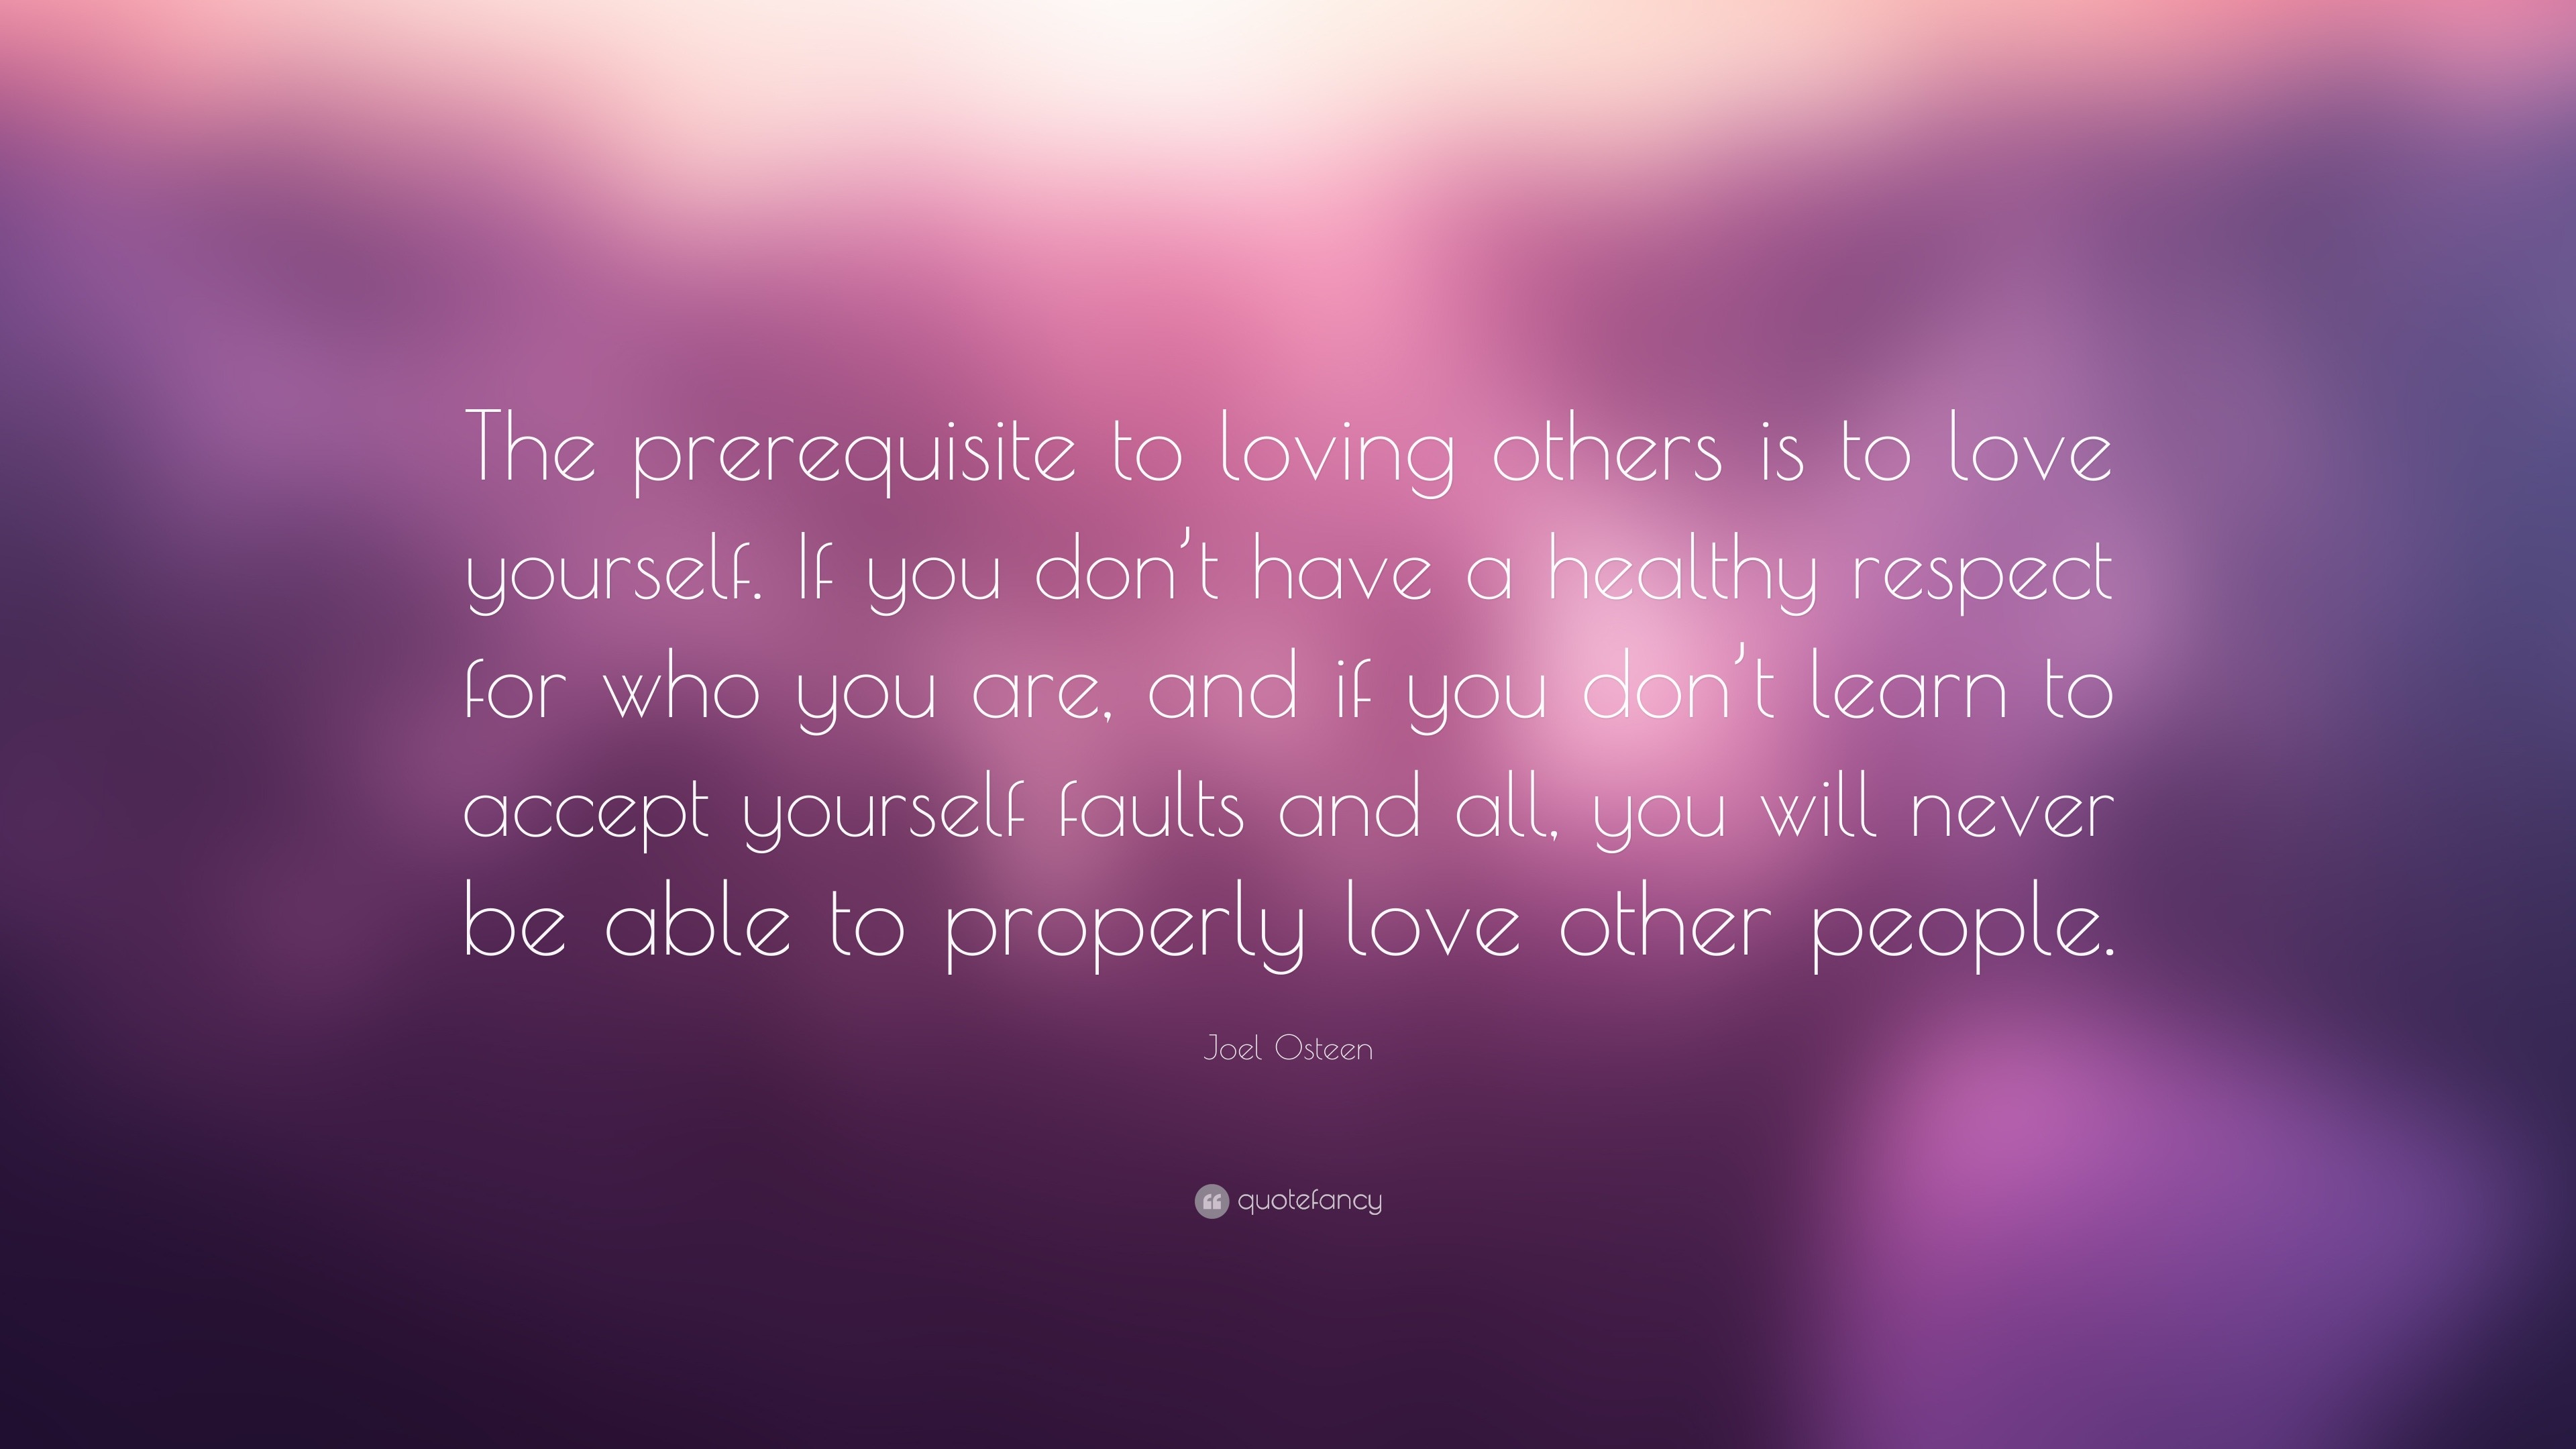 Joel Osteen Quote “The prerequisite to loving others is to love yourself If